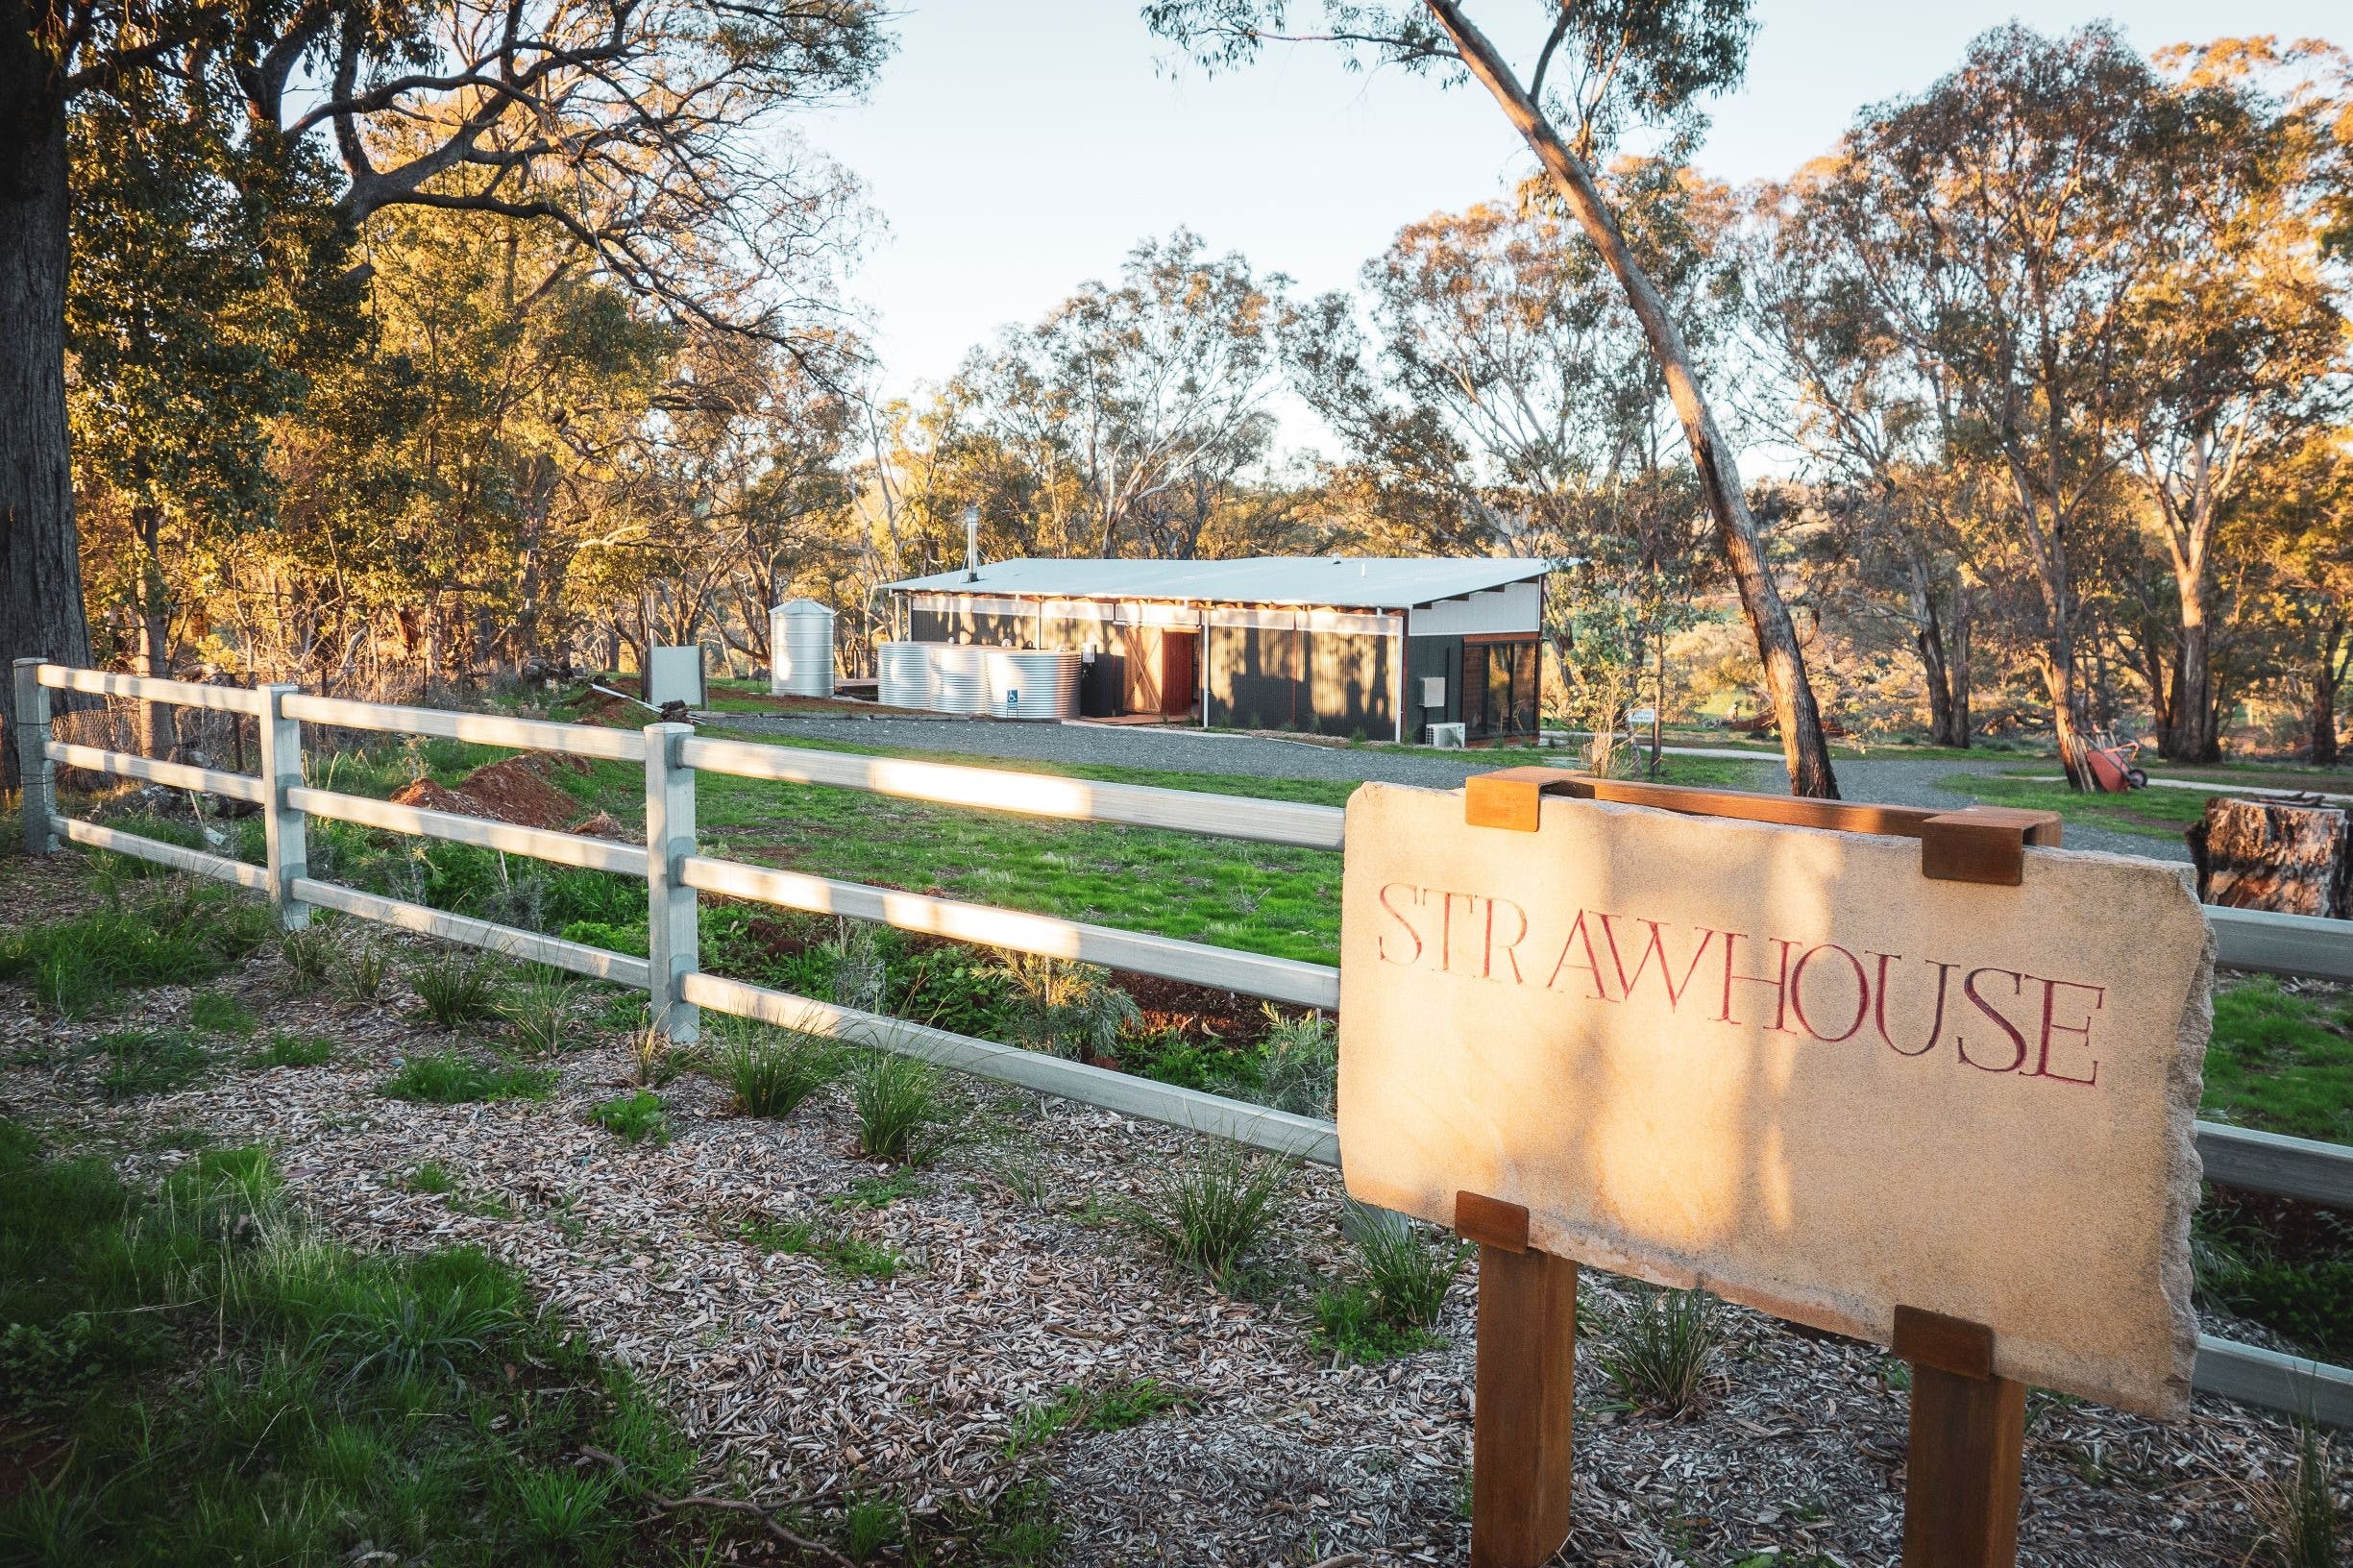 Strawhouse - Tourism Canberra